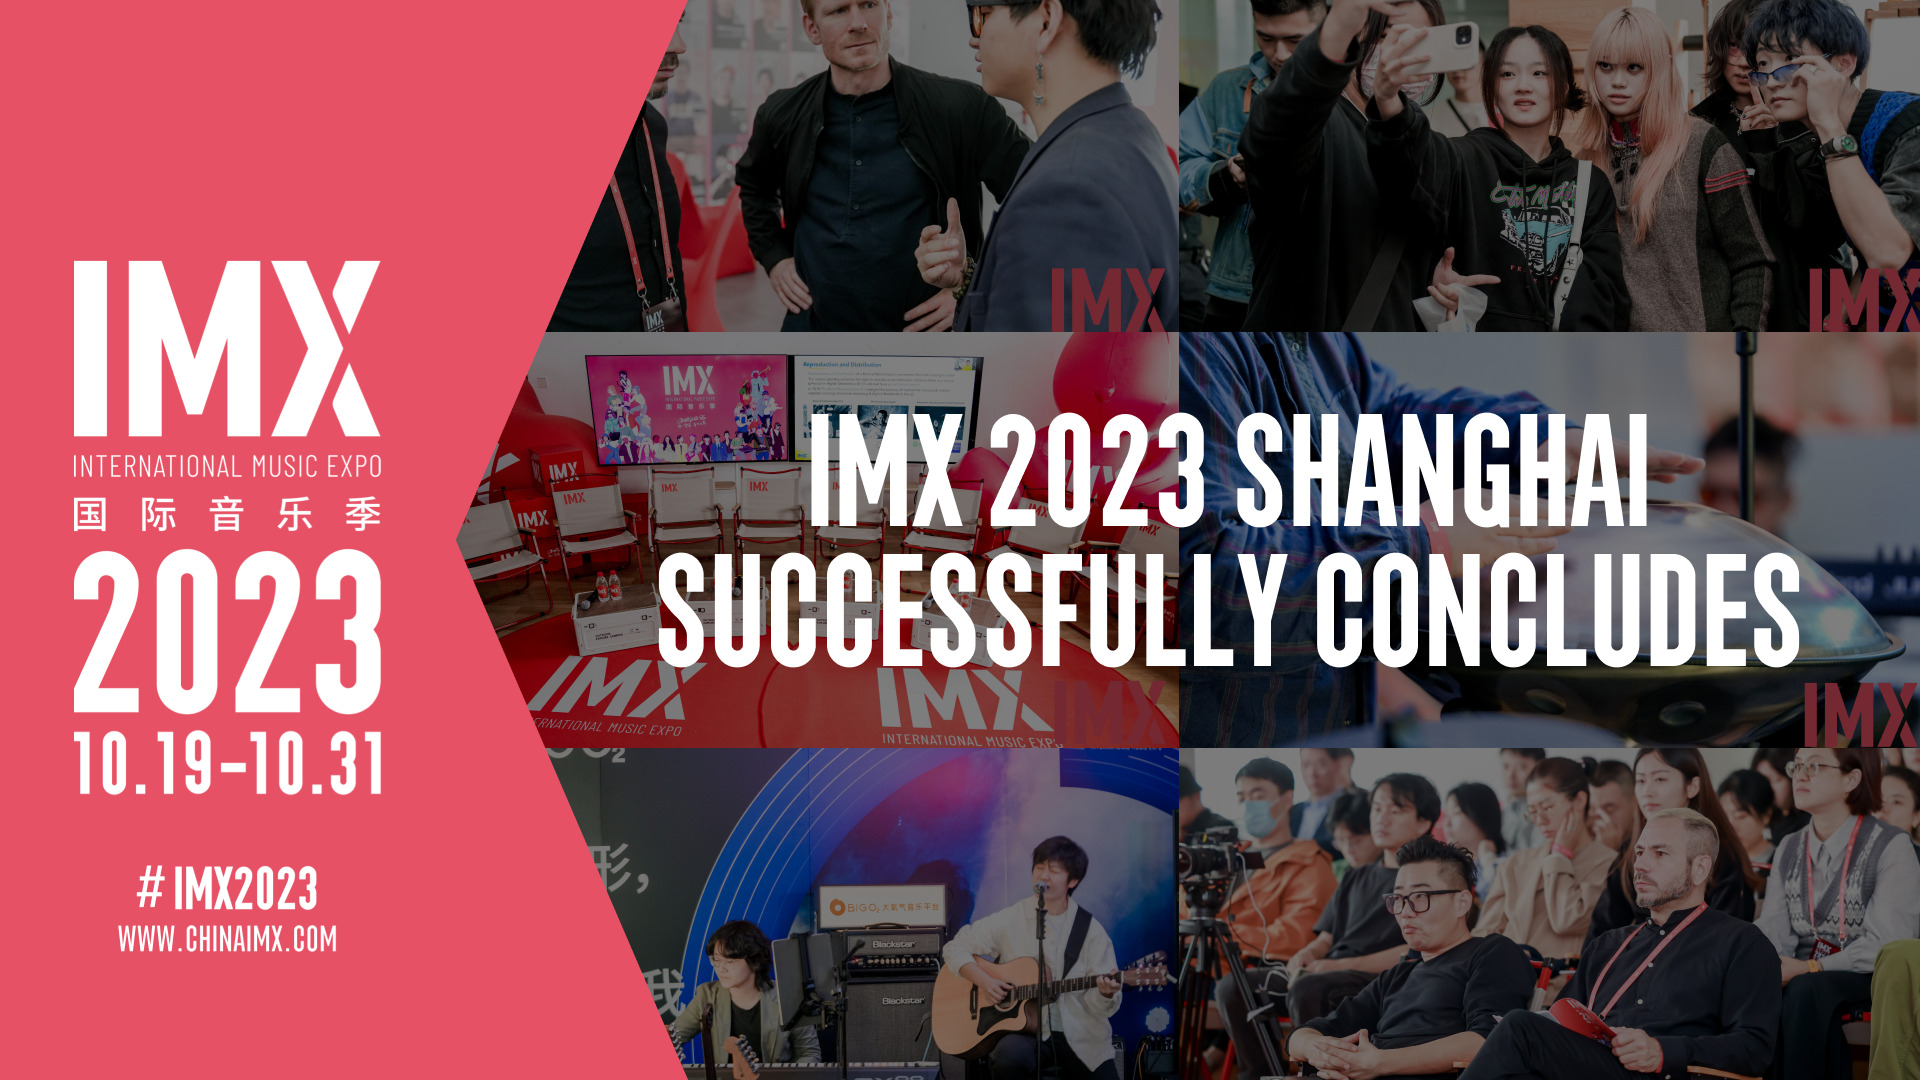 IMX 2023 Shanghai Successfully Concludes, Sets the Stage for Engaging Online Events